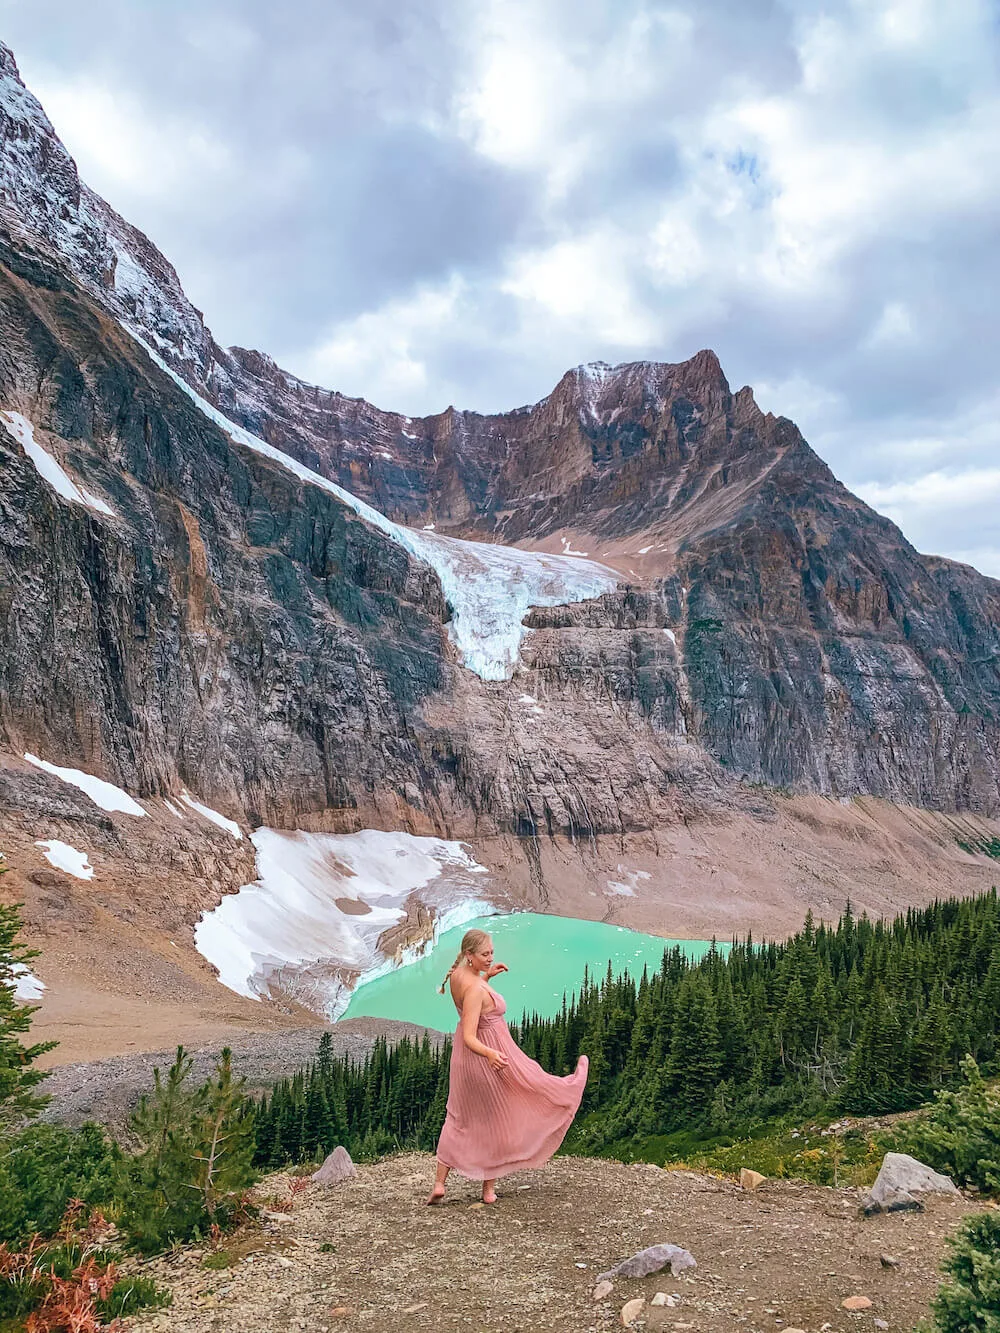 It's no surprise that Jasper National Park has some pretty incredible hikes. Being surrounded by mountains, lakes and wildlife basically screams amazing hiking opportunities ahead! But which hikes should you do when visiting Jasper? This guide lists the best hikes in Jasper National Park by skill level, now all you have to do is choose! Pictured here: Mount Edith Cavell Meadows Trail